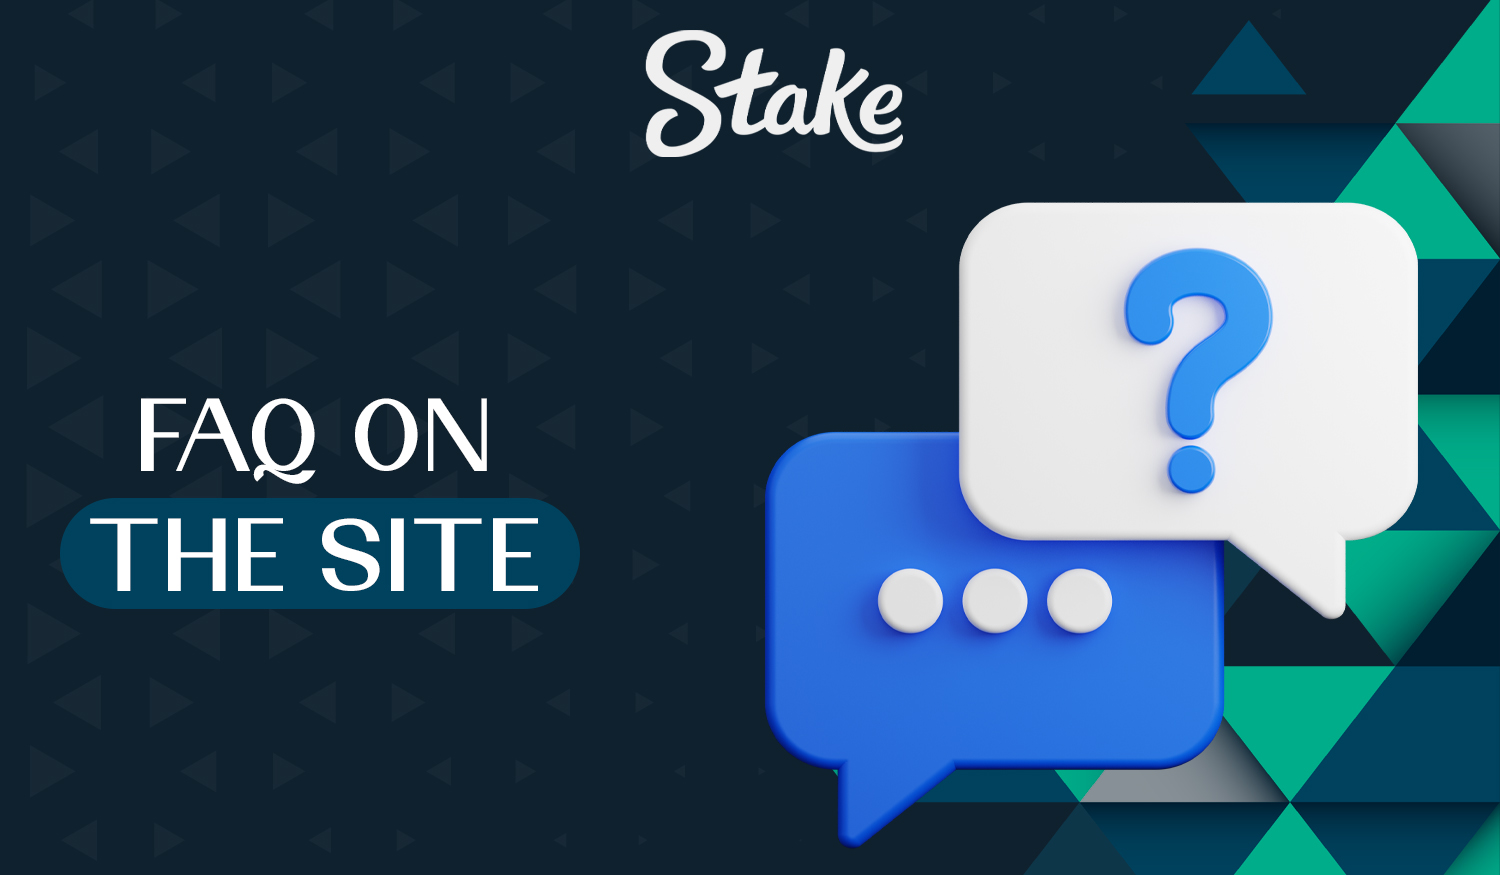 Features of the question and answer section on the Stake bookmaker website